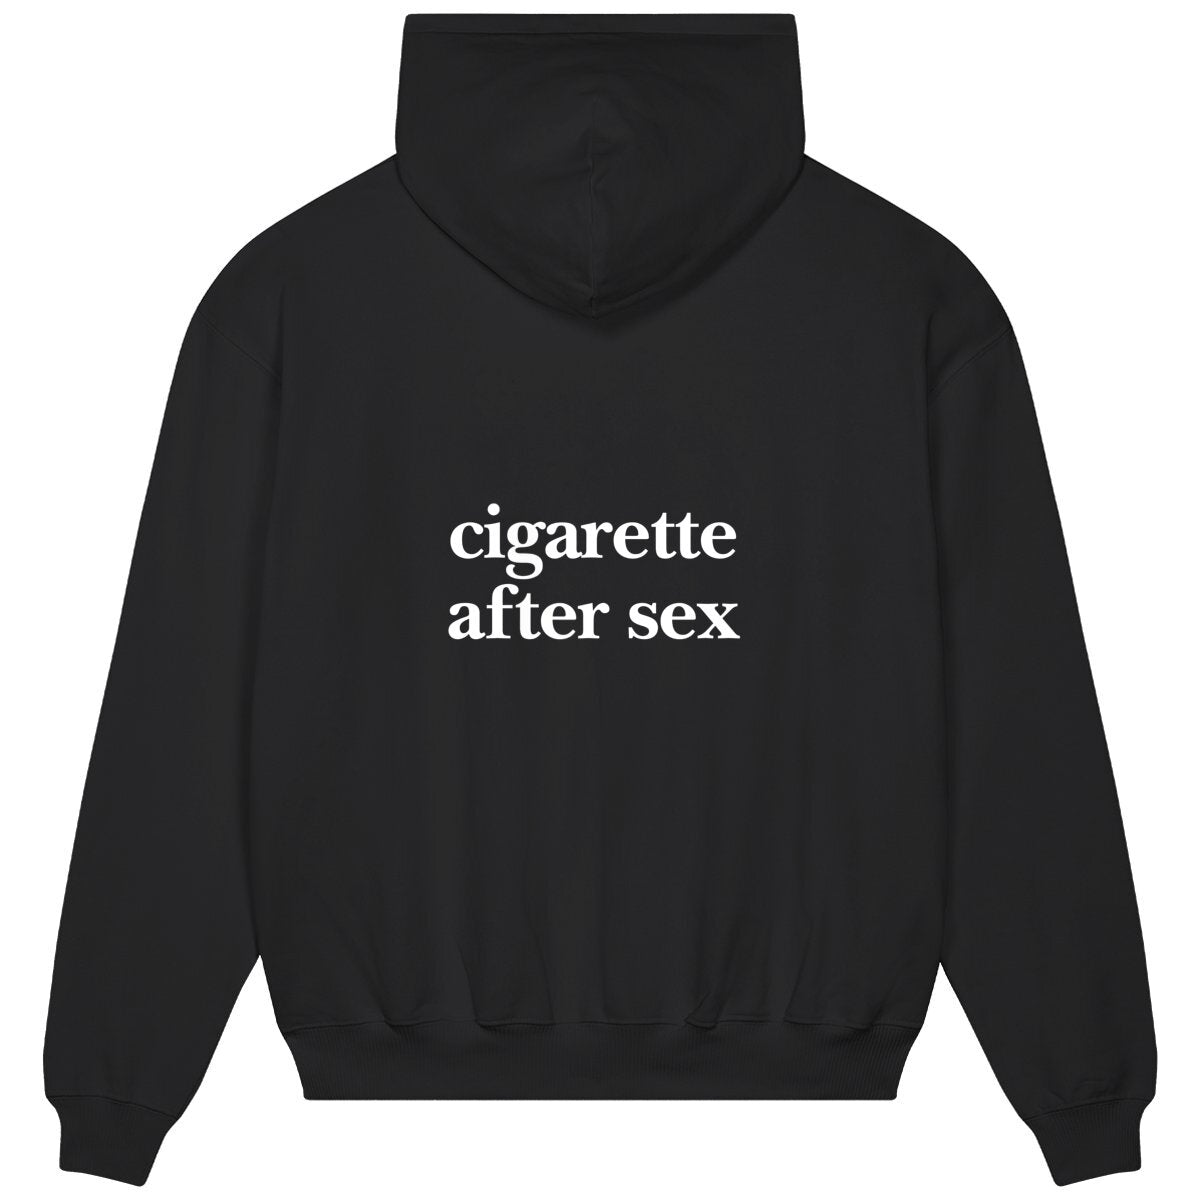 cigarette after sex hoodie back. cigarette after sex hoodie over. garçon garçon essentiel oversized hoodie. Sleek in black and whispering Parisian chic, this hoodie is the sartorial whisper of 'garçon garçon' — a statement of understated elegance. Perfect for those who carry a piece of Paris in their hearts and a touch of audacity on their sleeves.